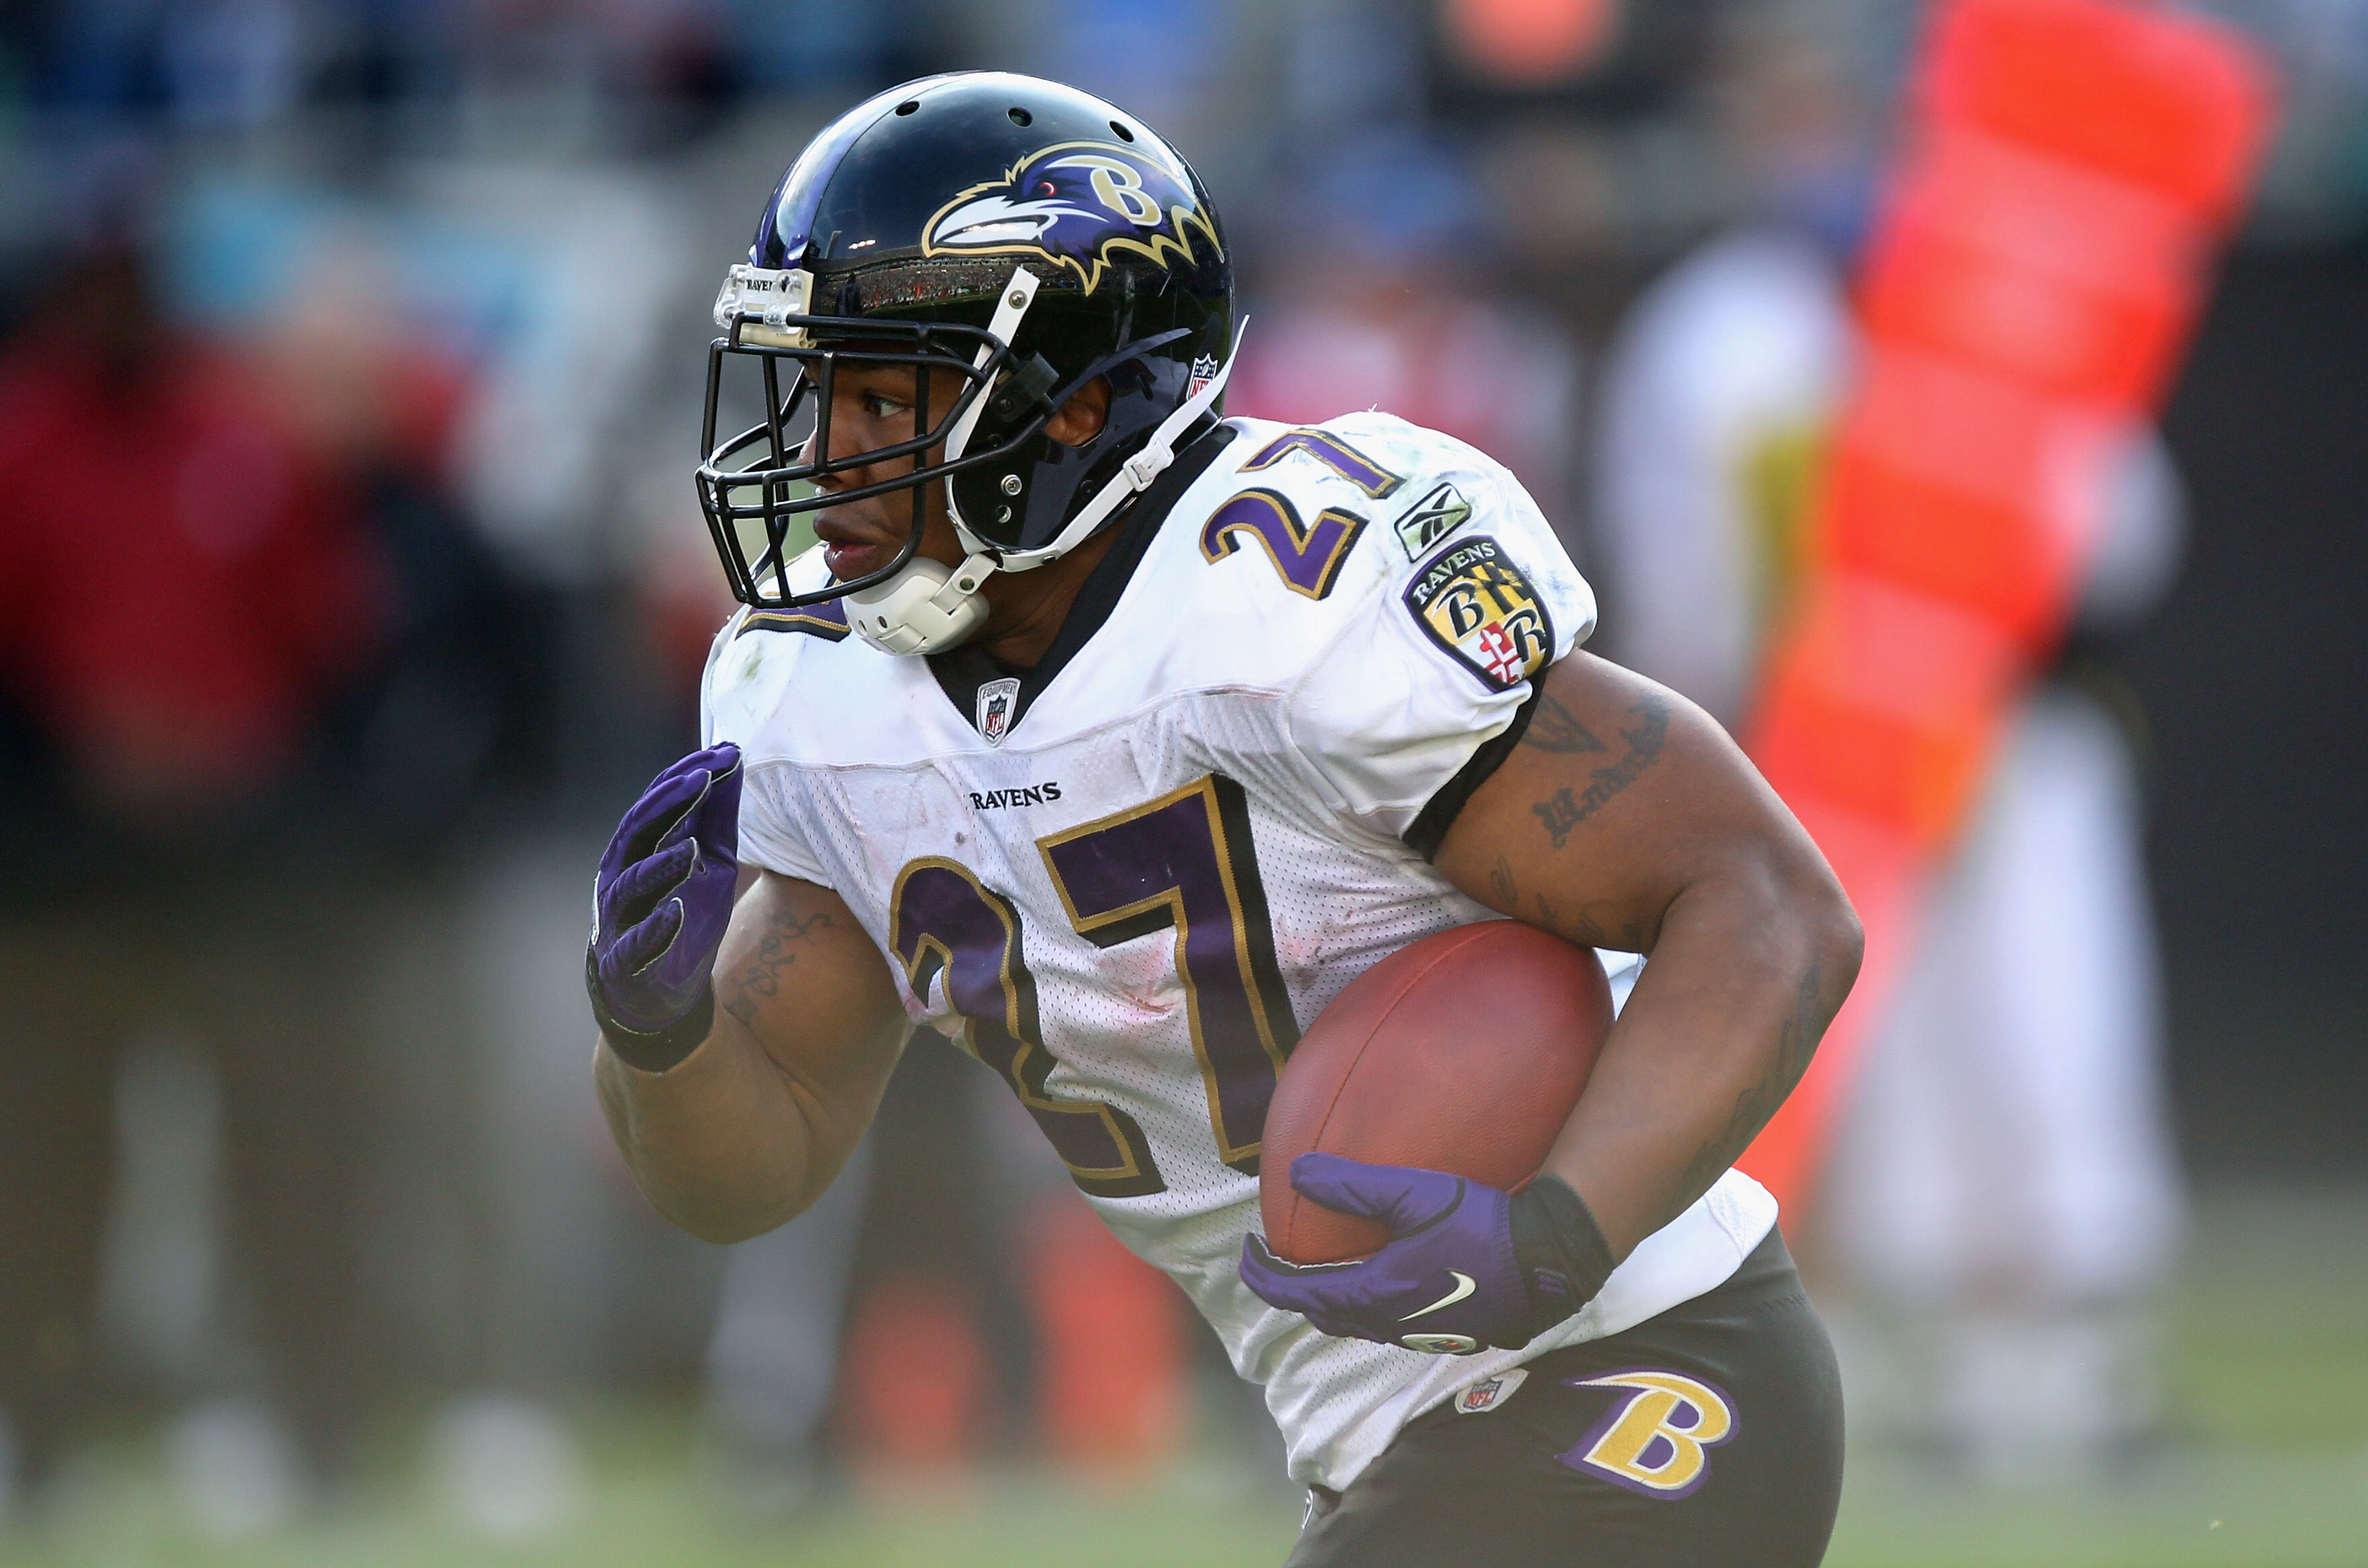 CHARLOTTE, NC - NOVEMBER 21:  Ray Rice #27 of the Baltimore Ravens against the Carolina Panthers at Bank of America Stadium on November 21, 2010 in Charlotte, North Carolina.  (Photo by Streeter Lecka/Getty Images)